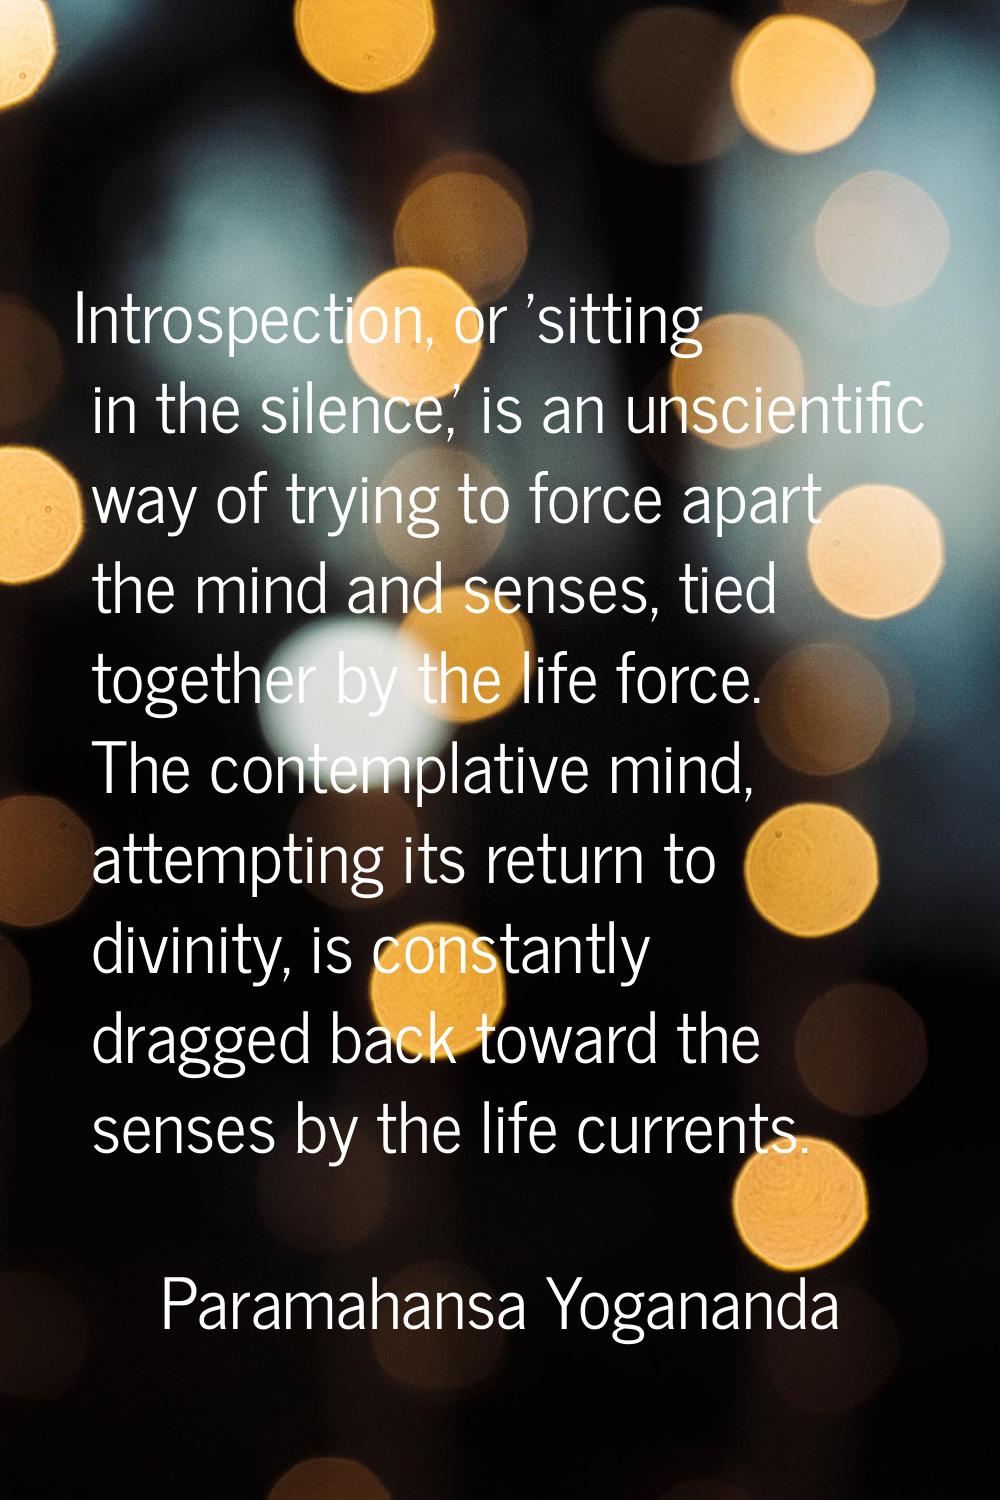 Introspection, or 'sitting in the silence,' is an unscientific way of trying to force apart the min